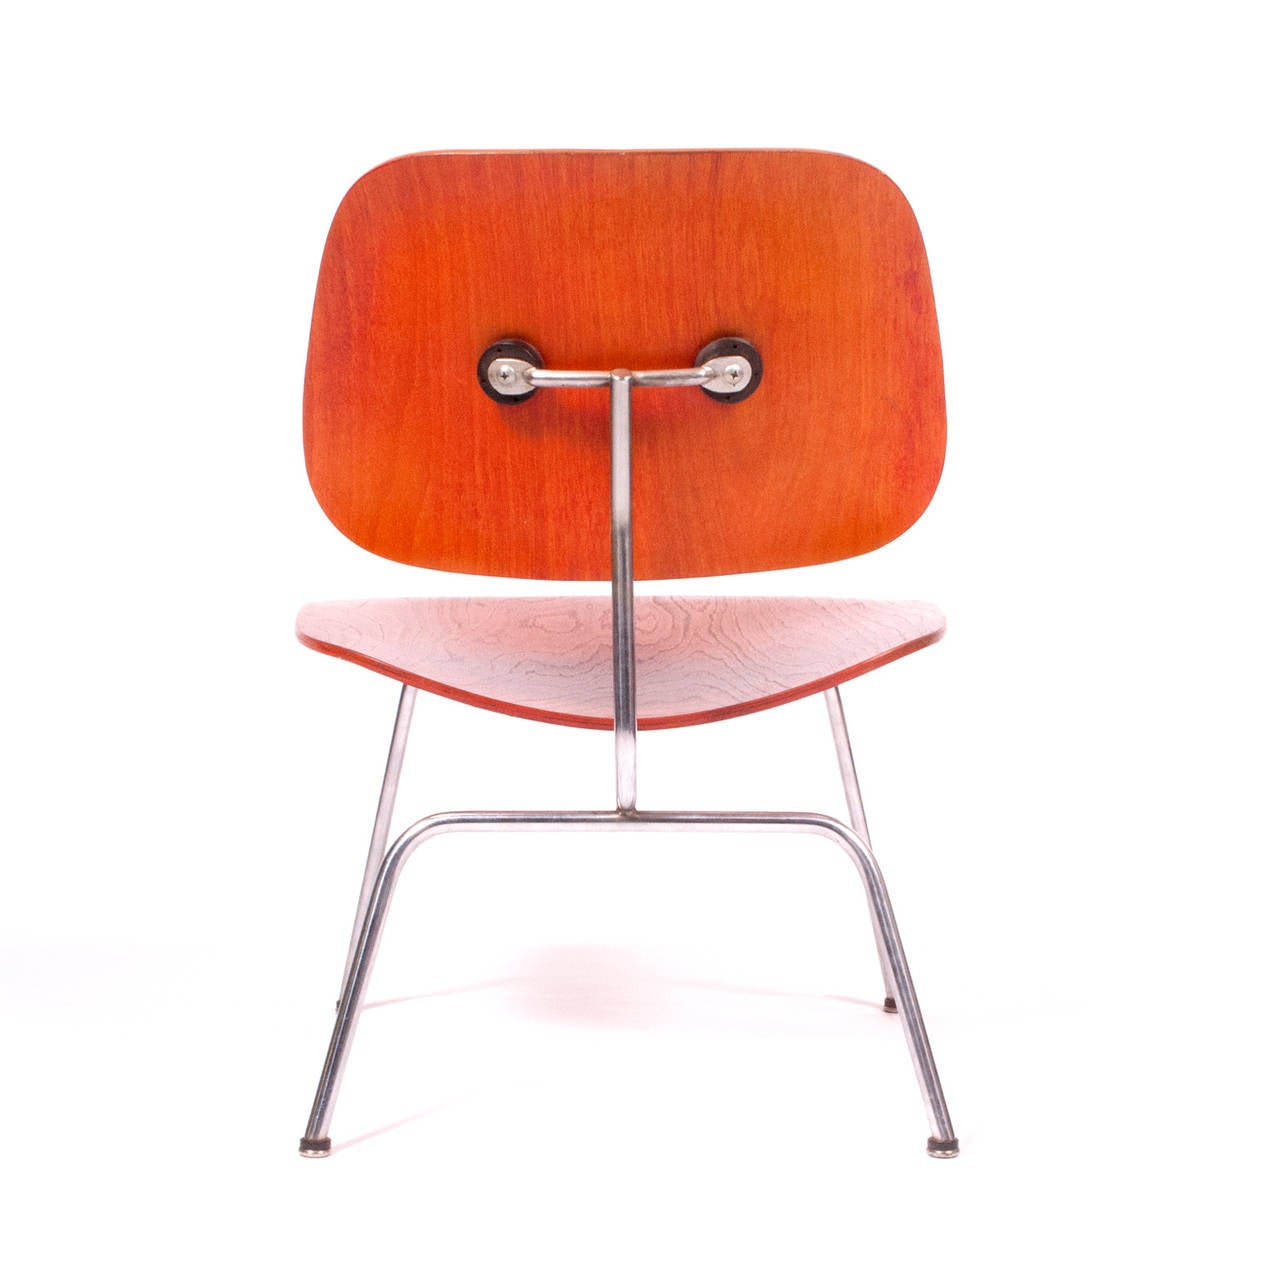 American 1951 Original Red Aniline Dyed LCM Chair by Charles Eames